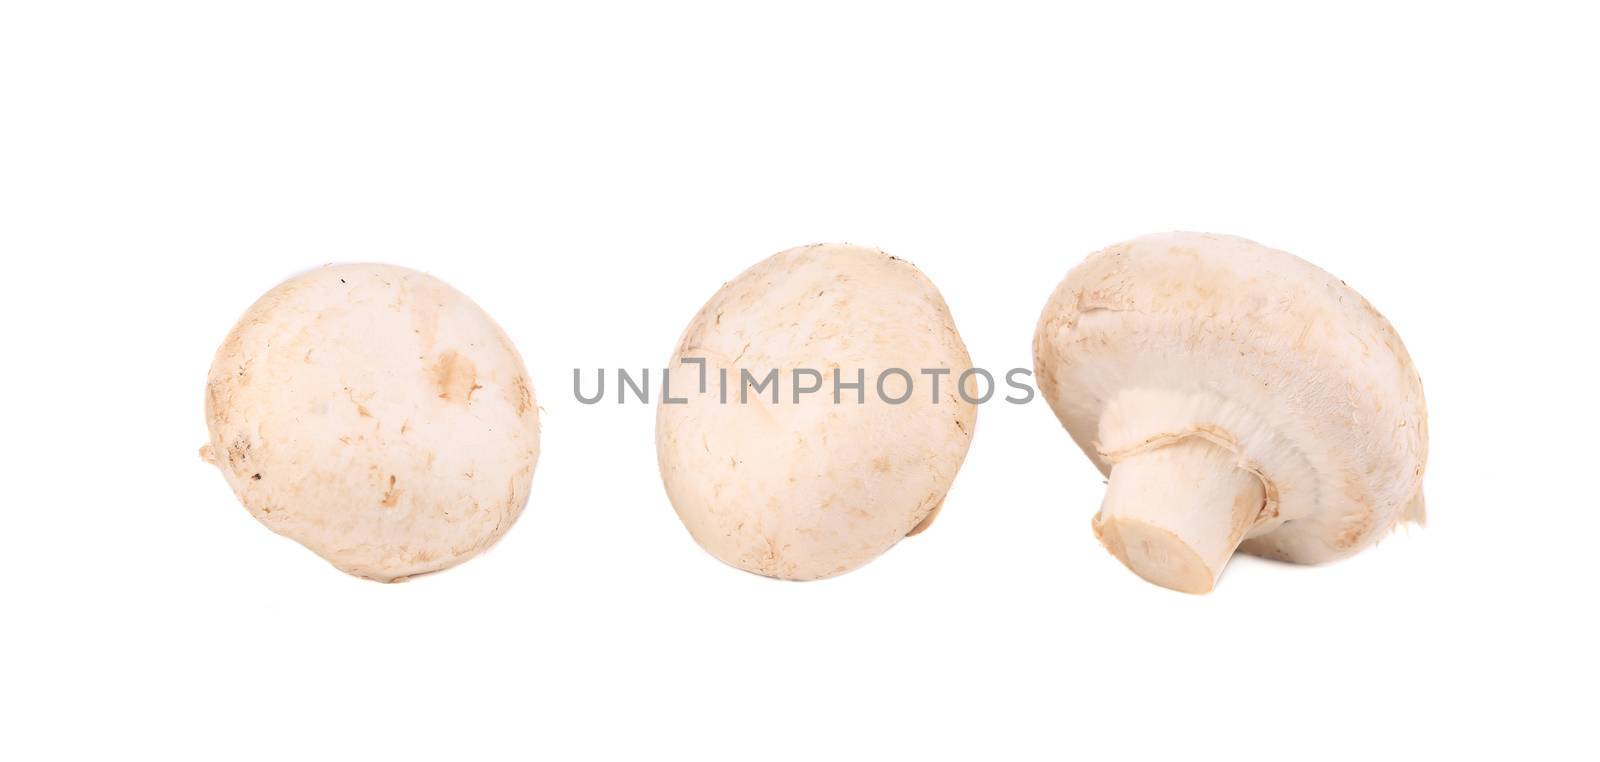 White mushrooms in row close up. Isolated on a white background.